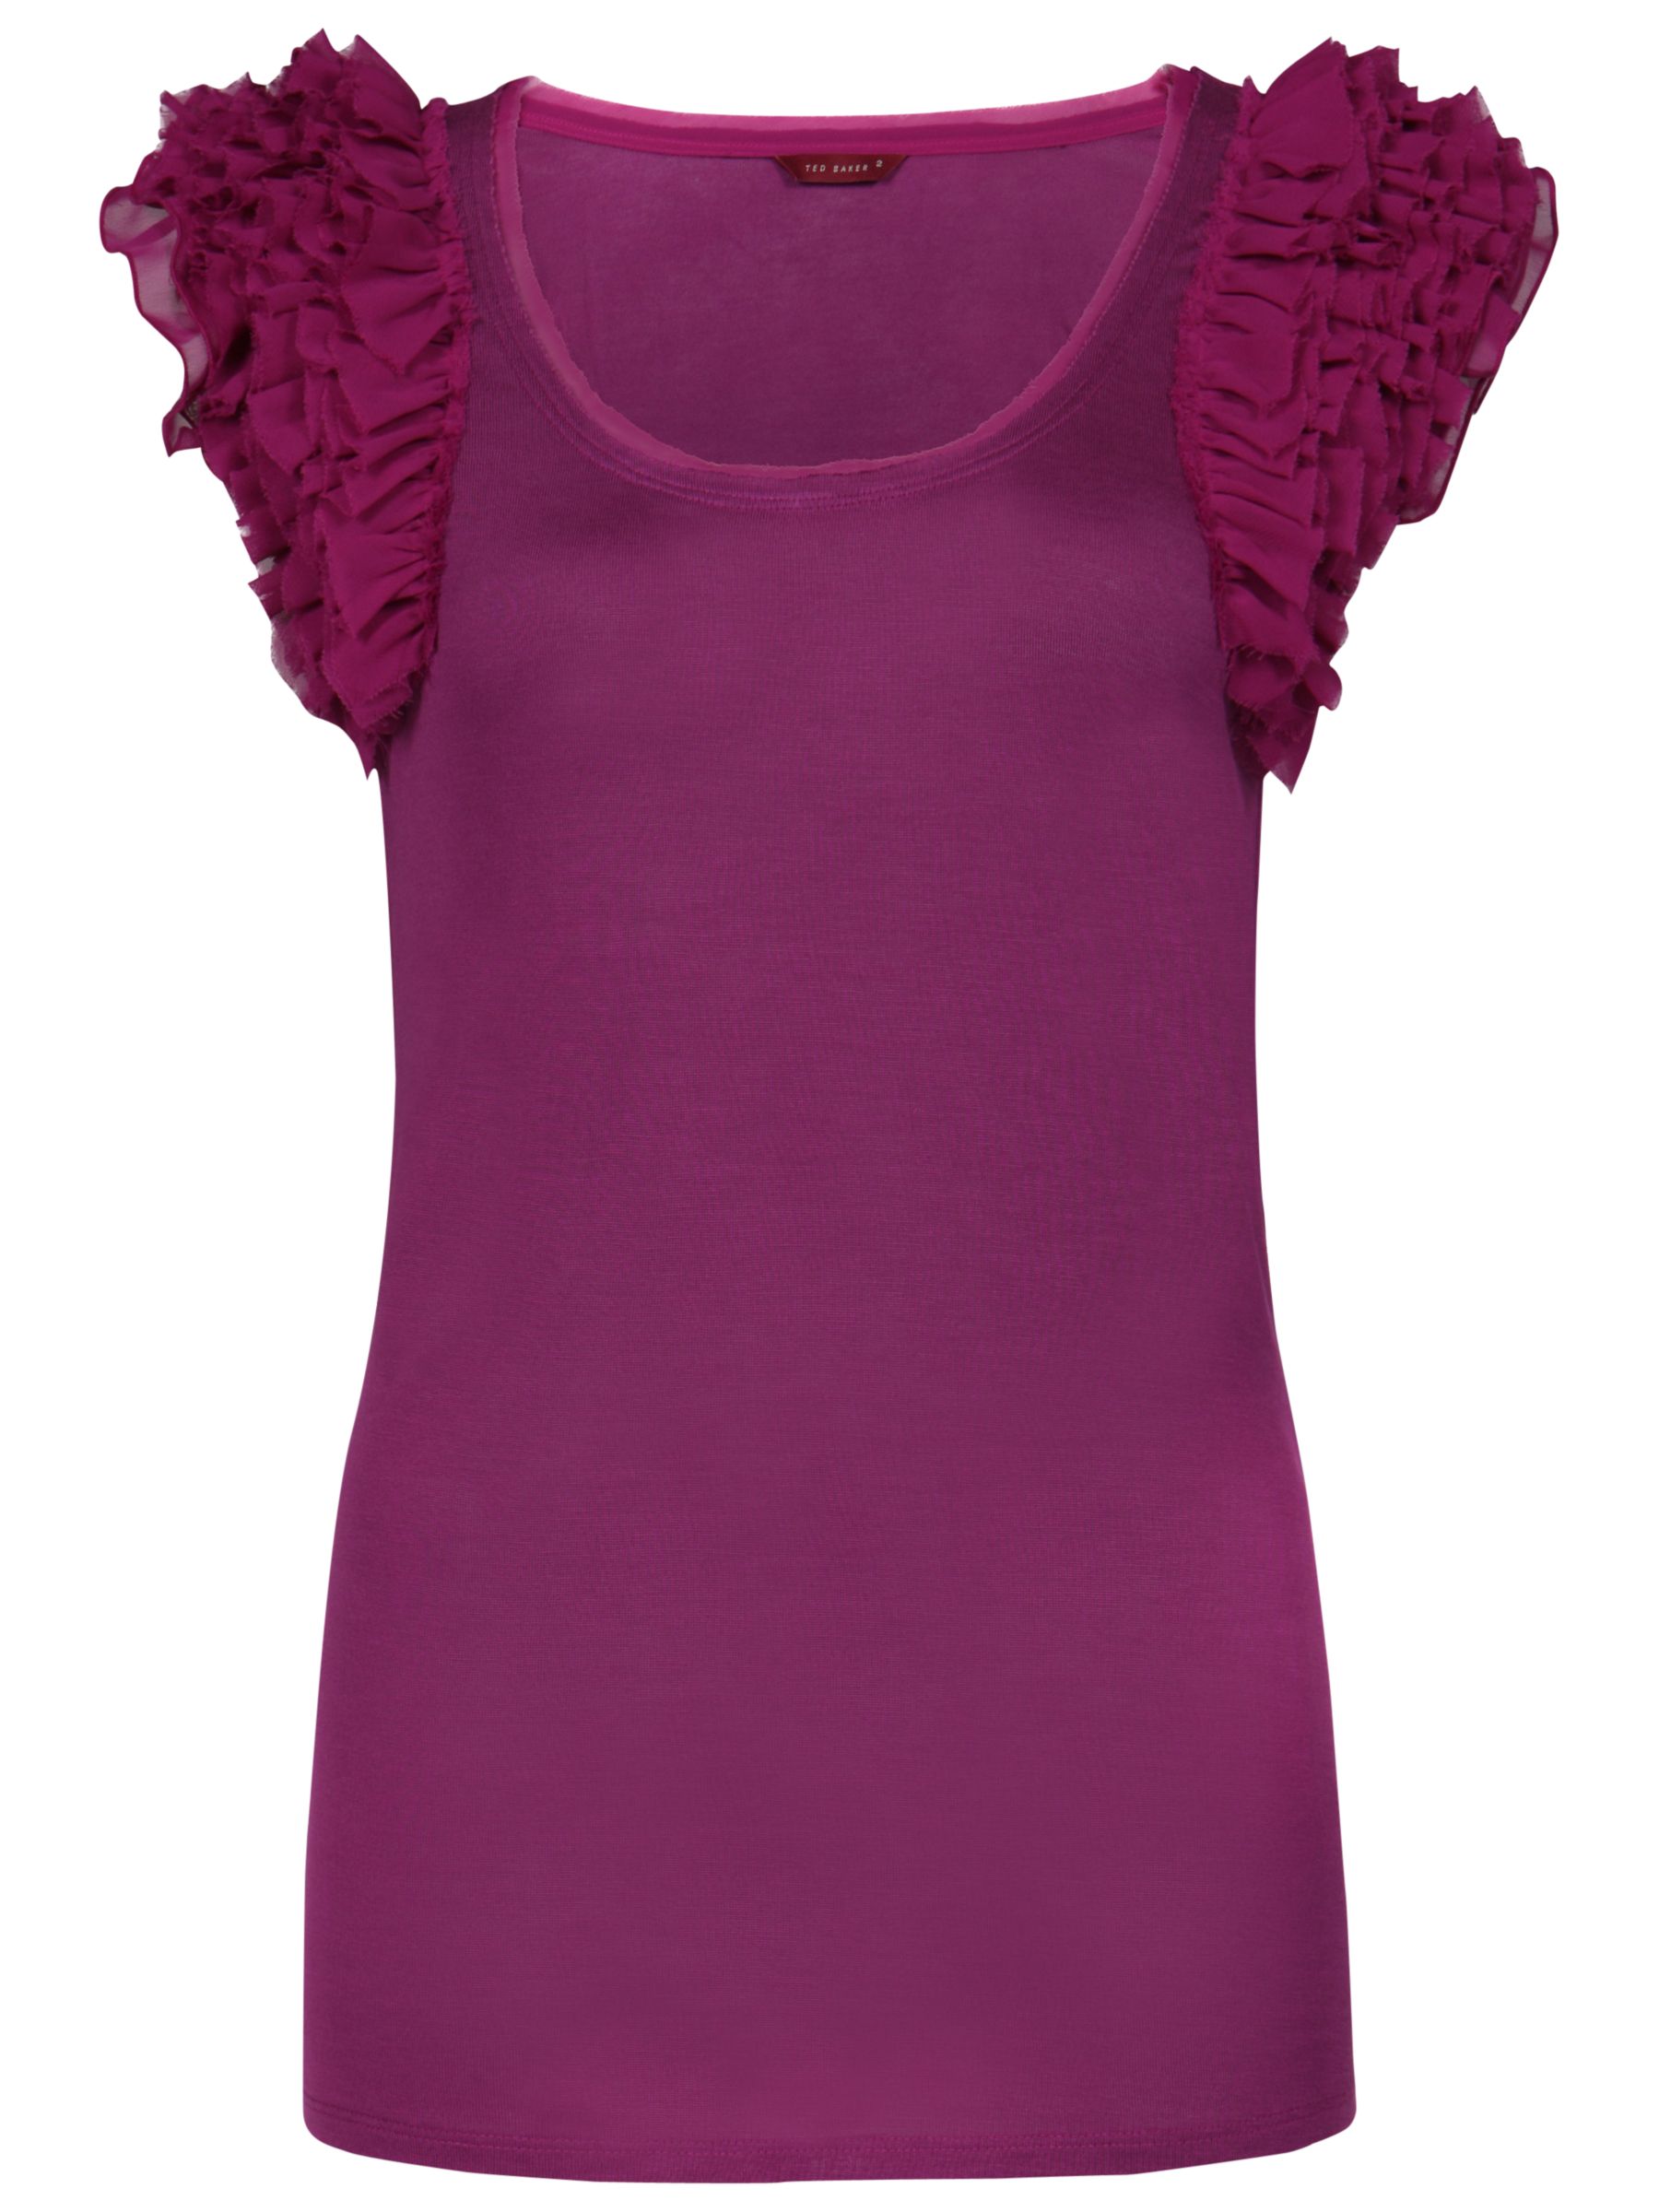 Ted Baker Luiza Frill Detail T-Shirt, Purple